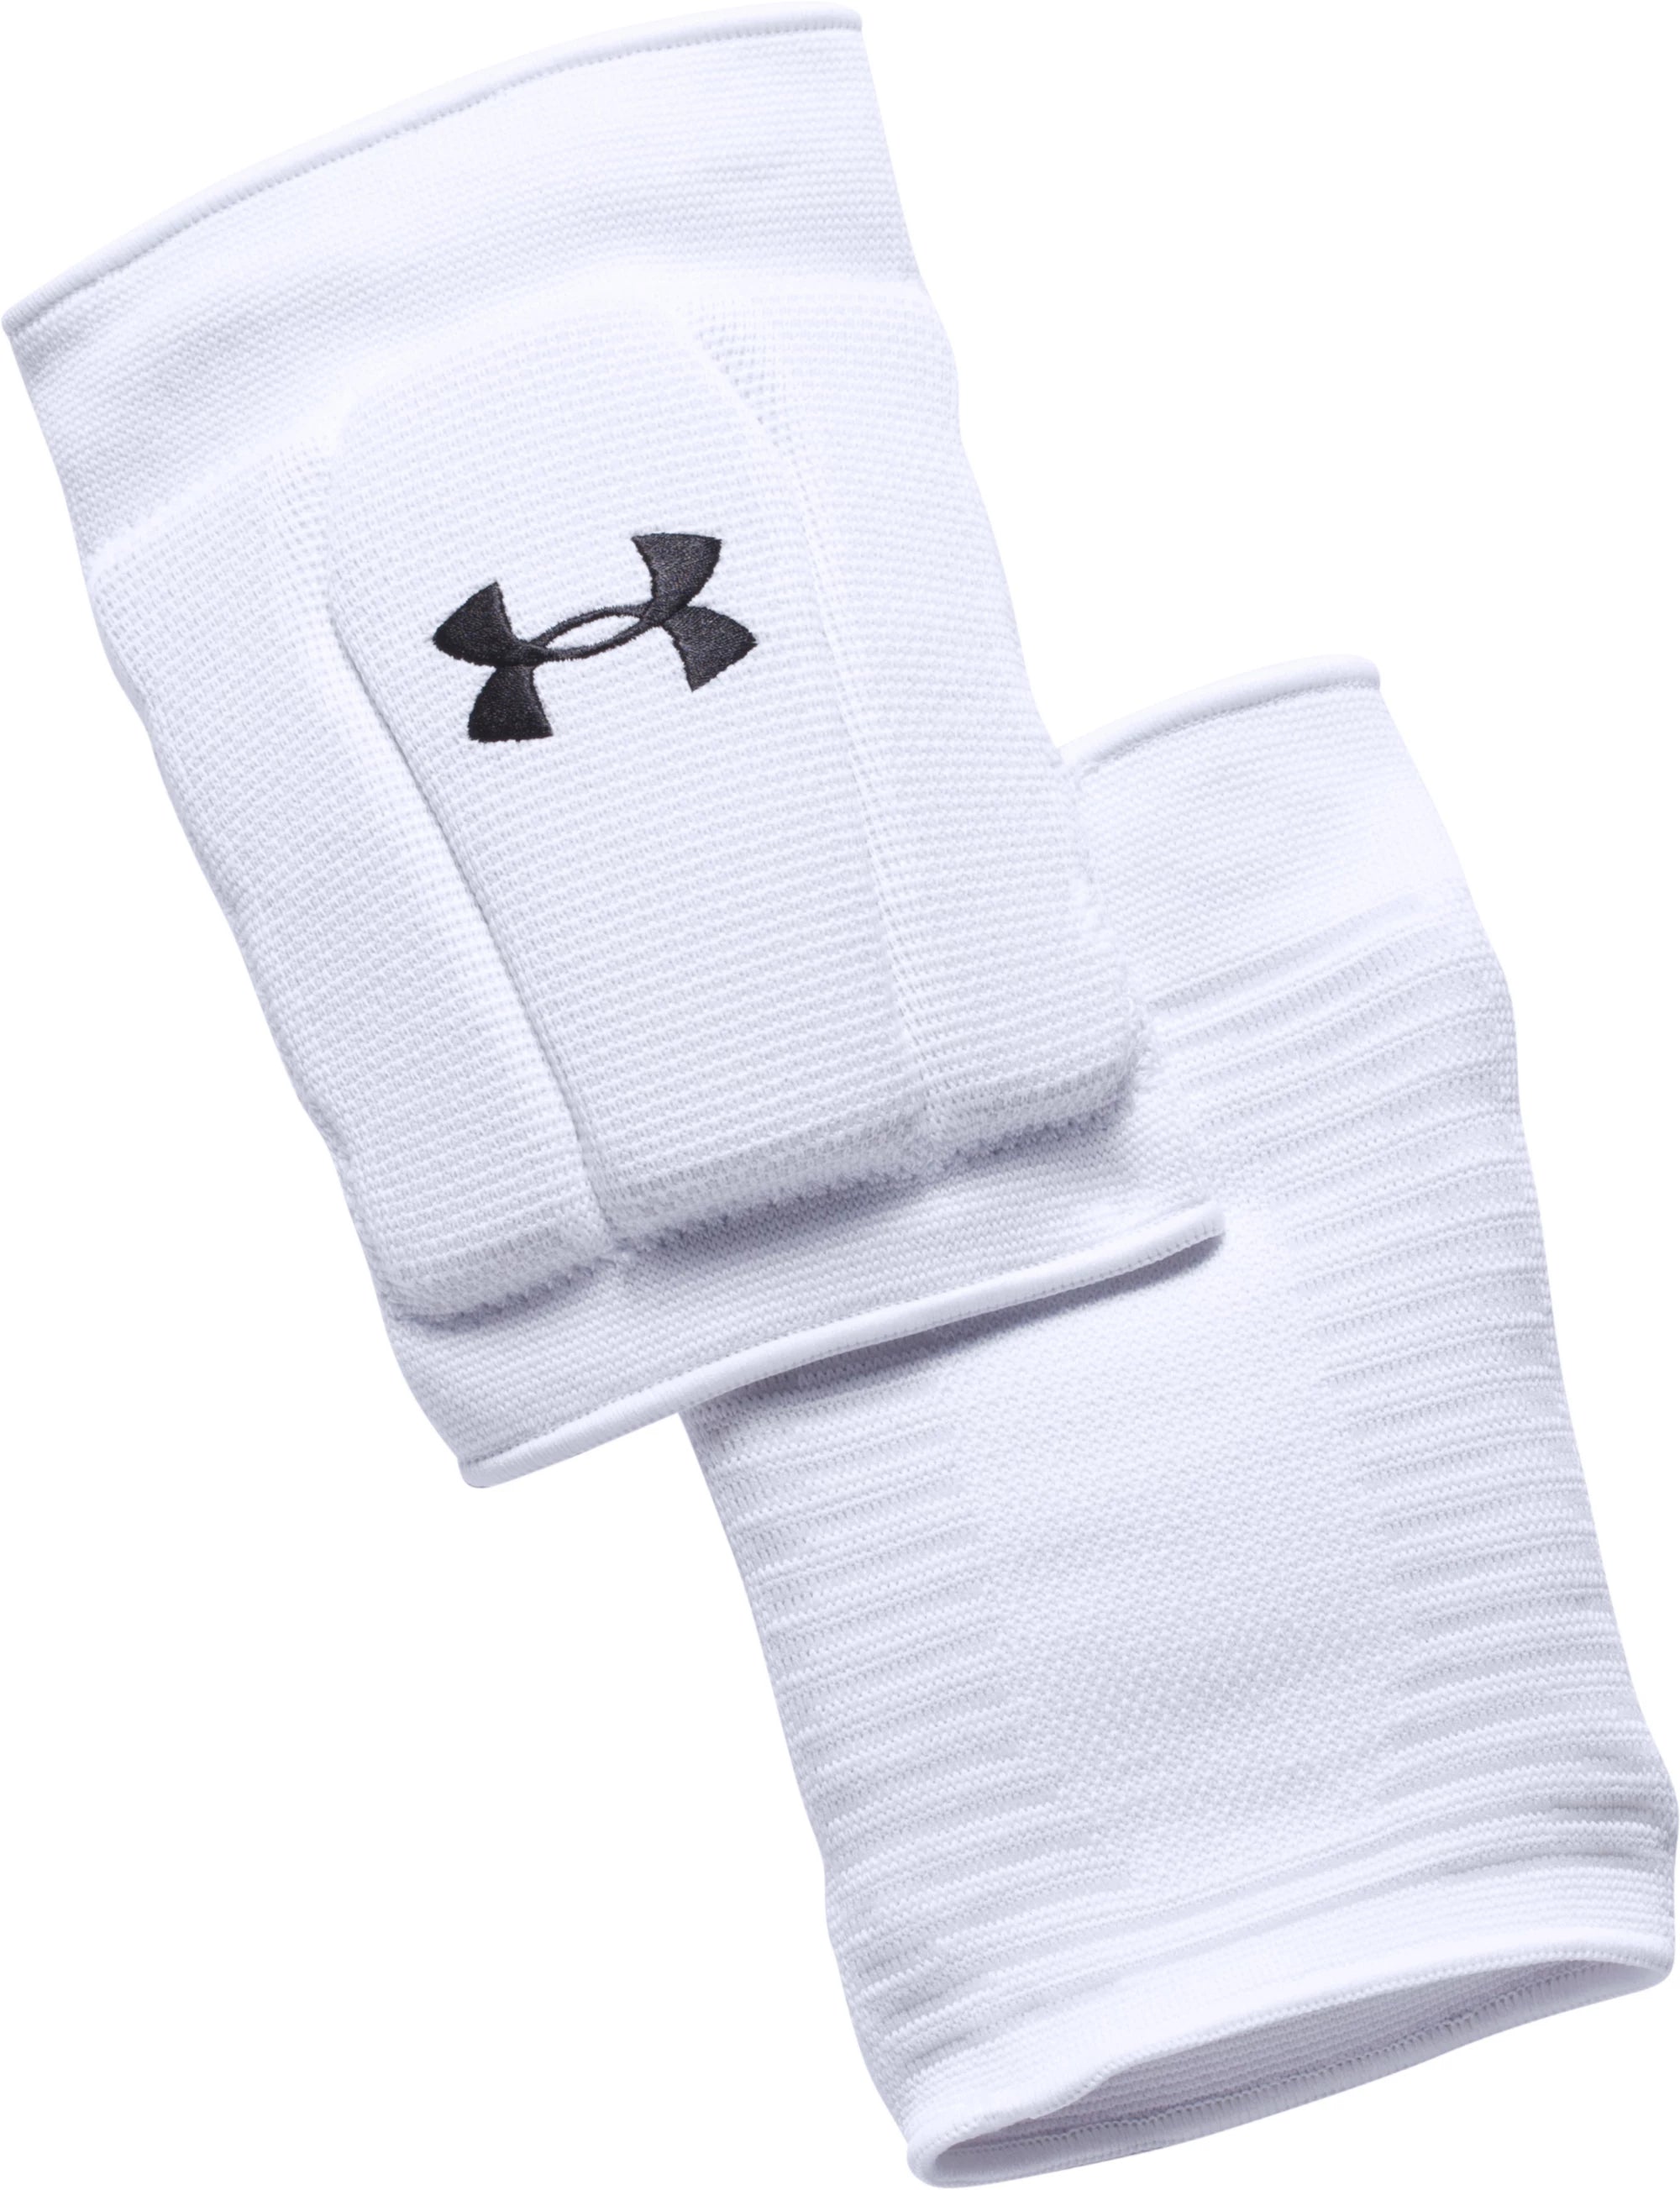 Under Armour 2.0 Volleyball Knee Pads